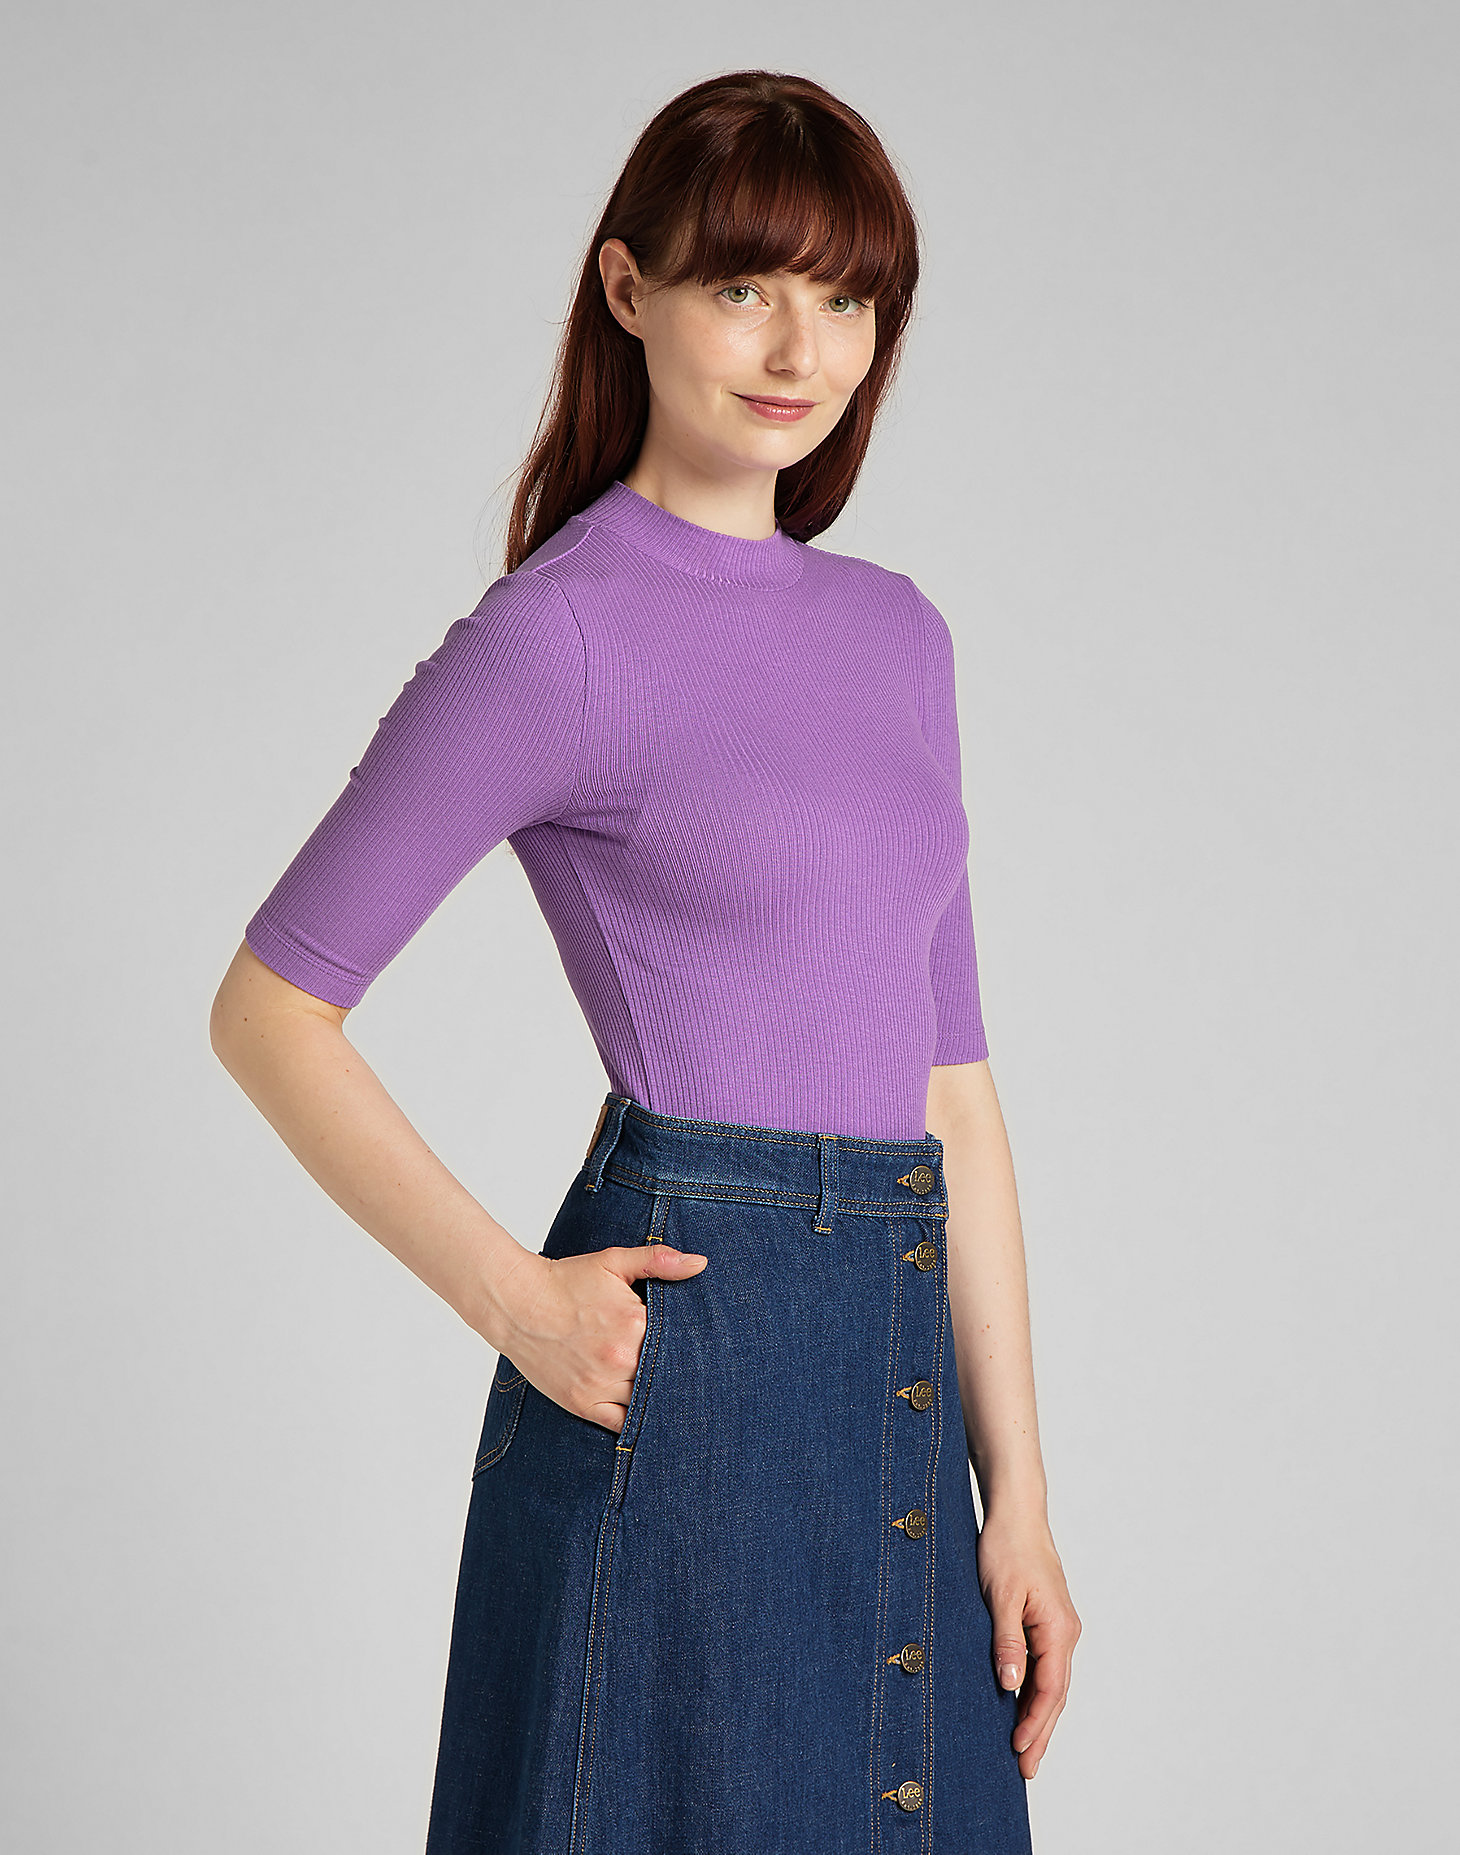 Ribbed Tee in Amethyst Orchid alternative view 3